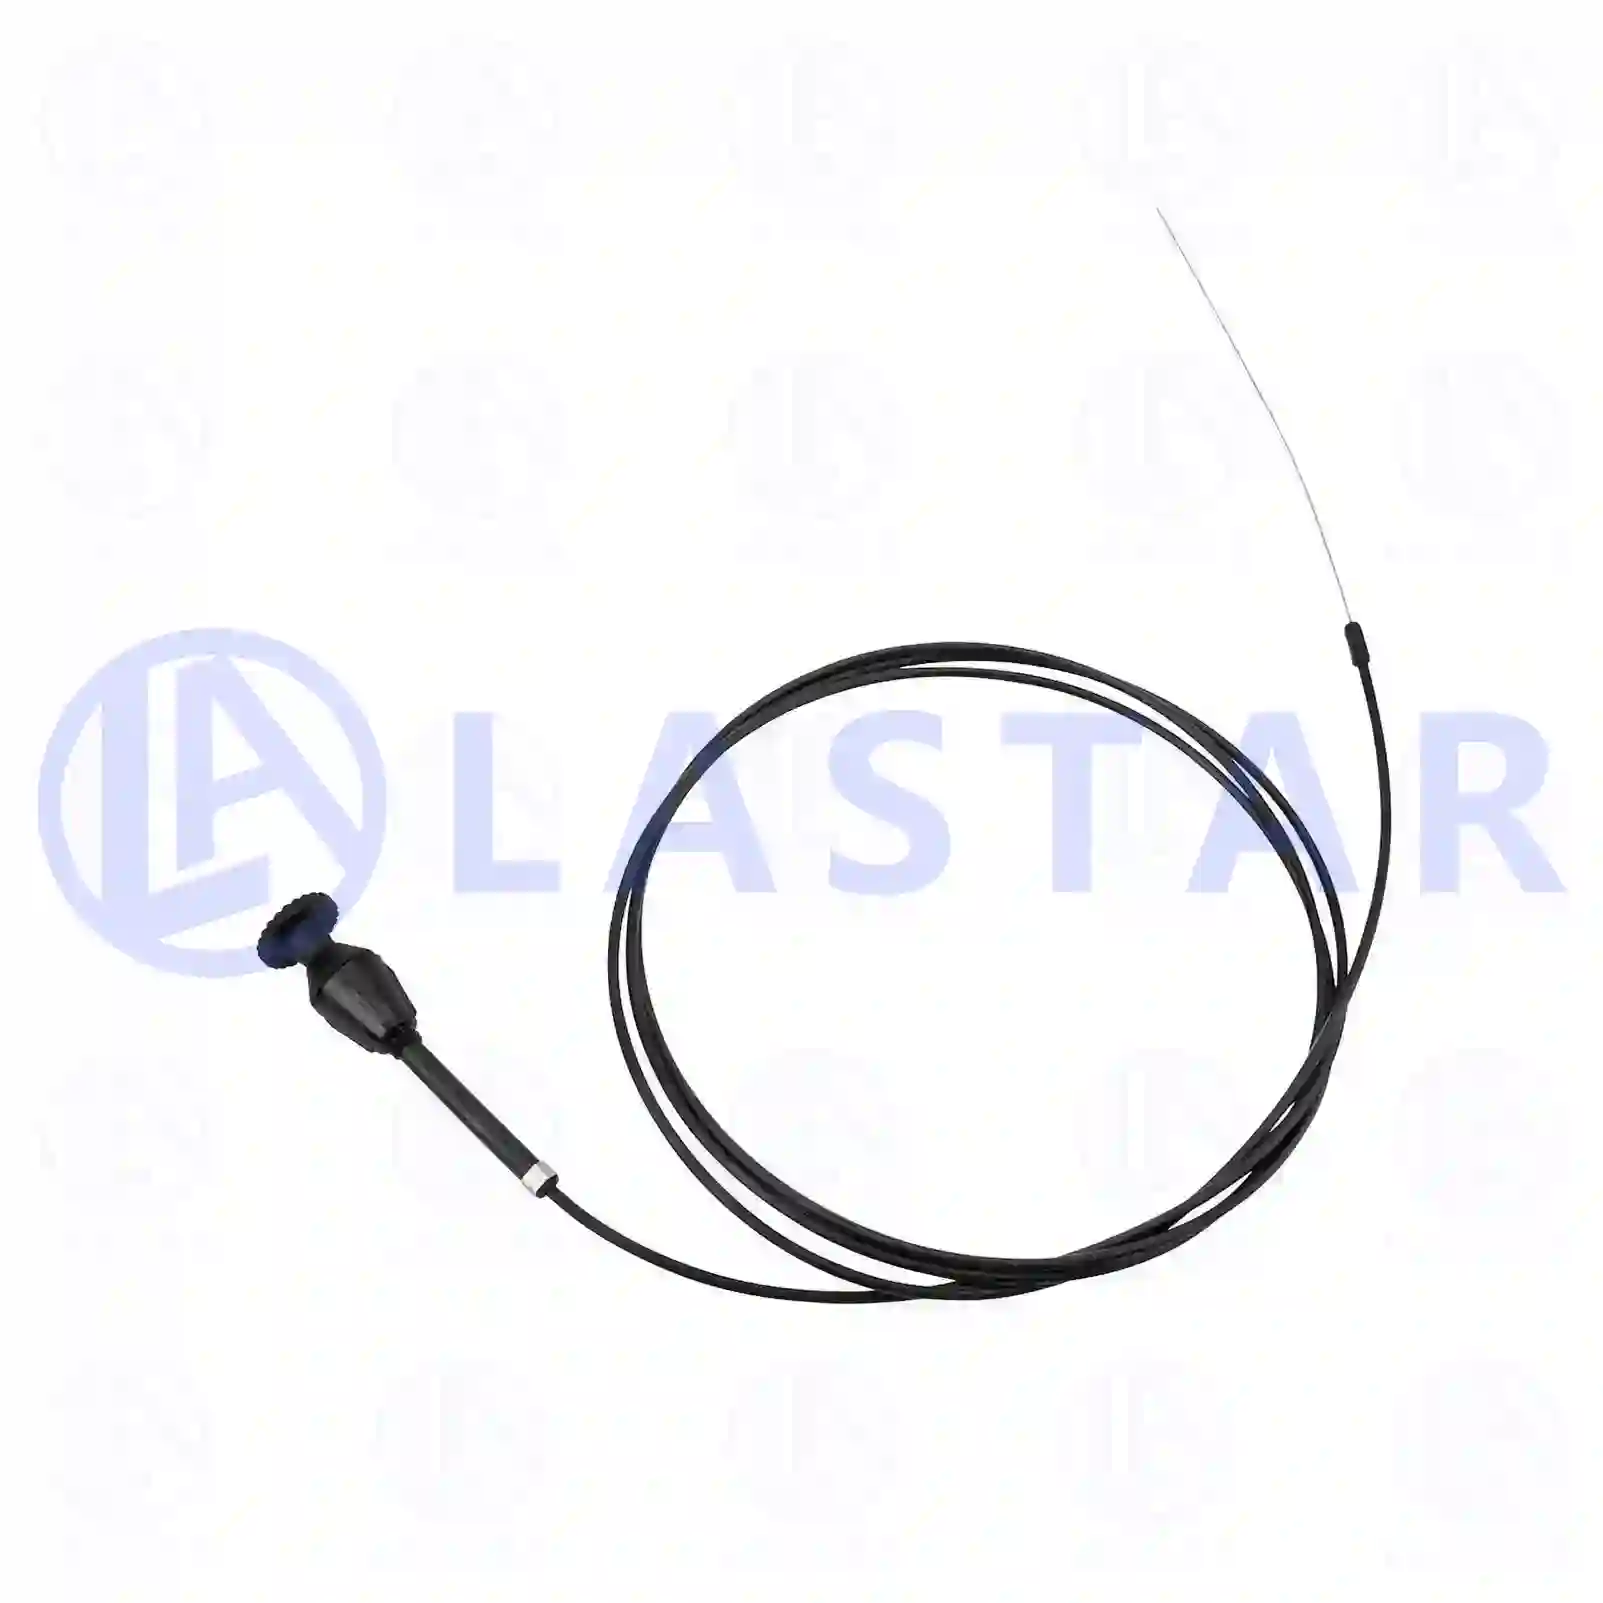 Throttle cable, 77704185, 1581538 ||  77704185 Lastar Spare Part | Truck Spare Parts, Auotomotive Spare Parts Throttle cable, 77704185, 1581538 ||  77704185 Lastar Spare Part | Truck Spare Parts, Auotomotive Spare Parts